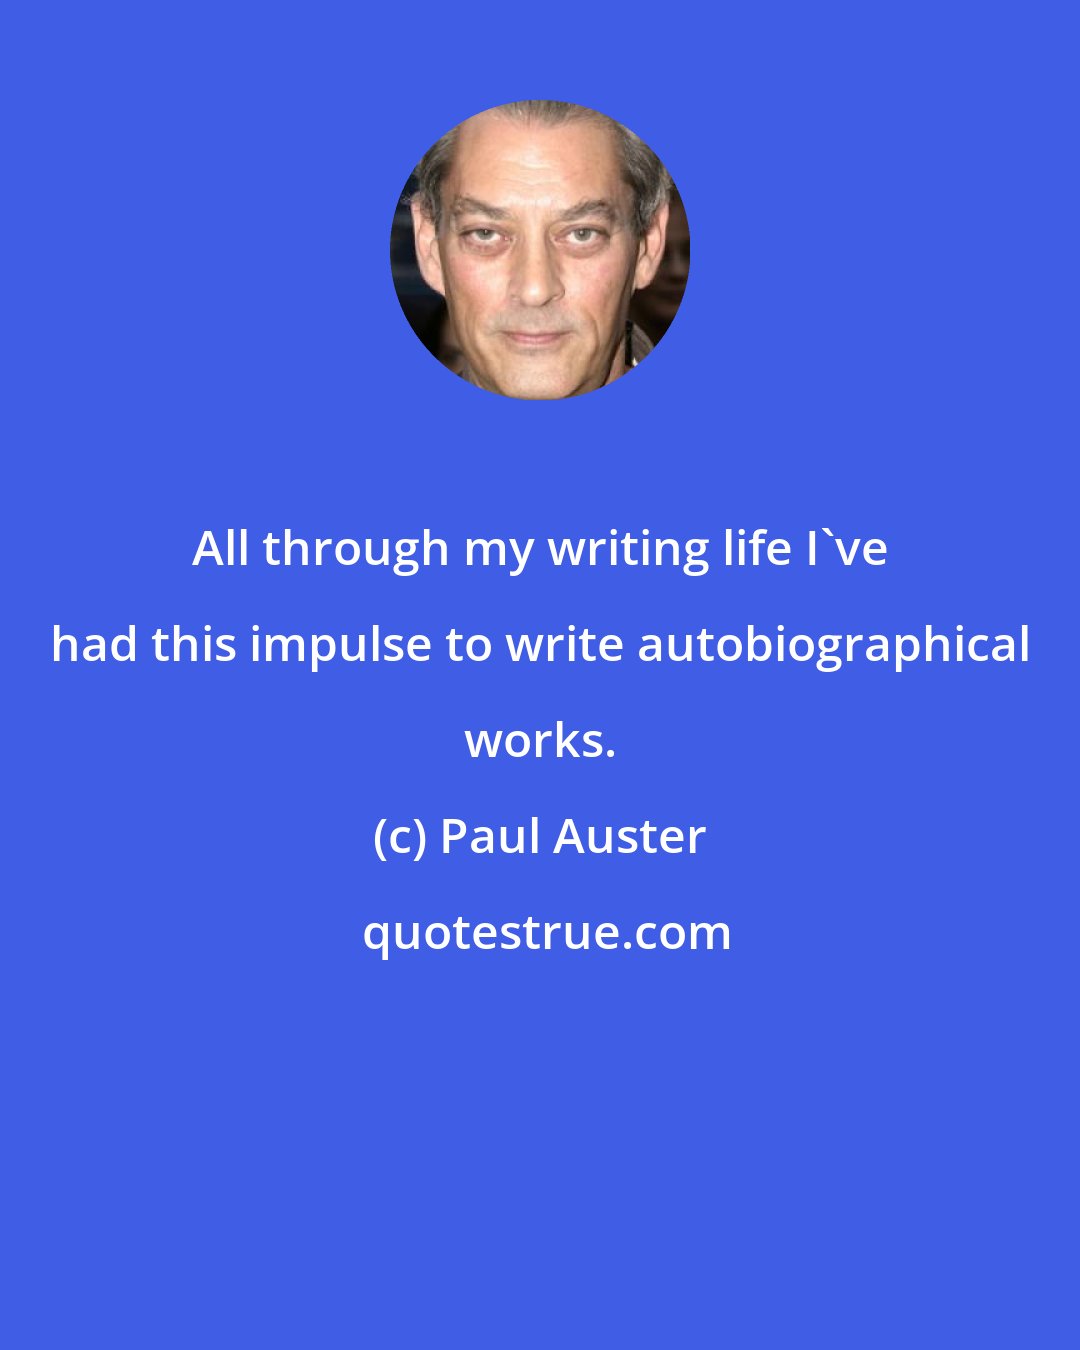 Paul Auster: All through my writing life I've had this impulse to write autobiographical works.